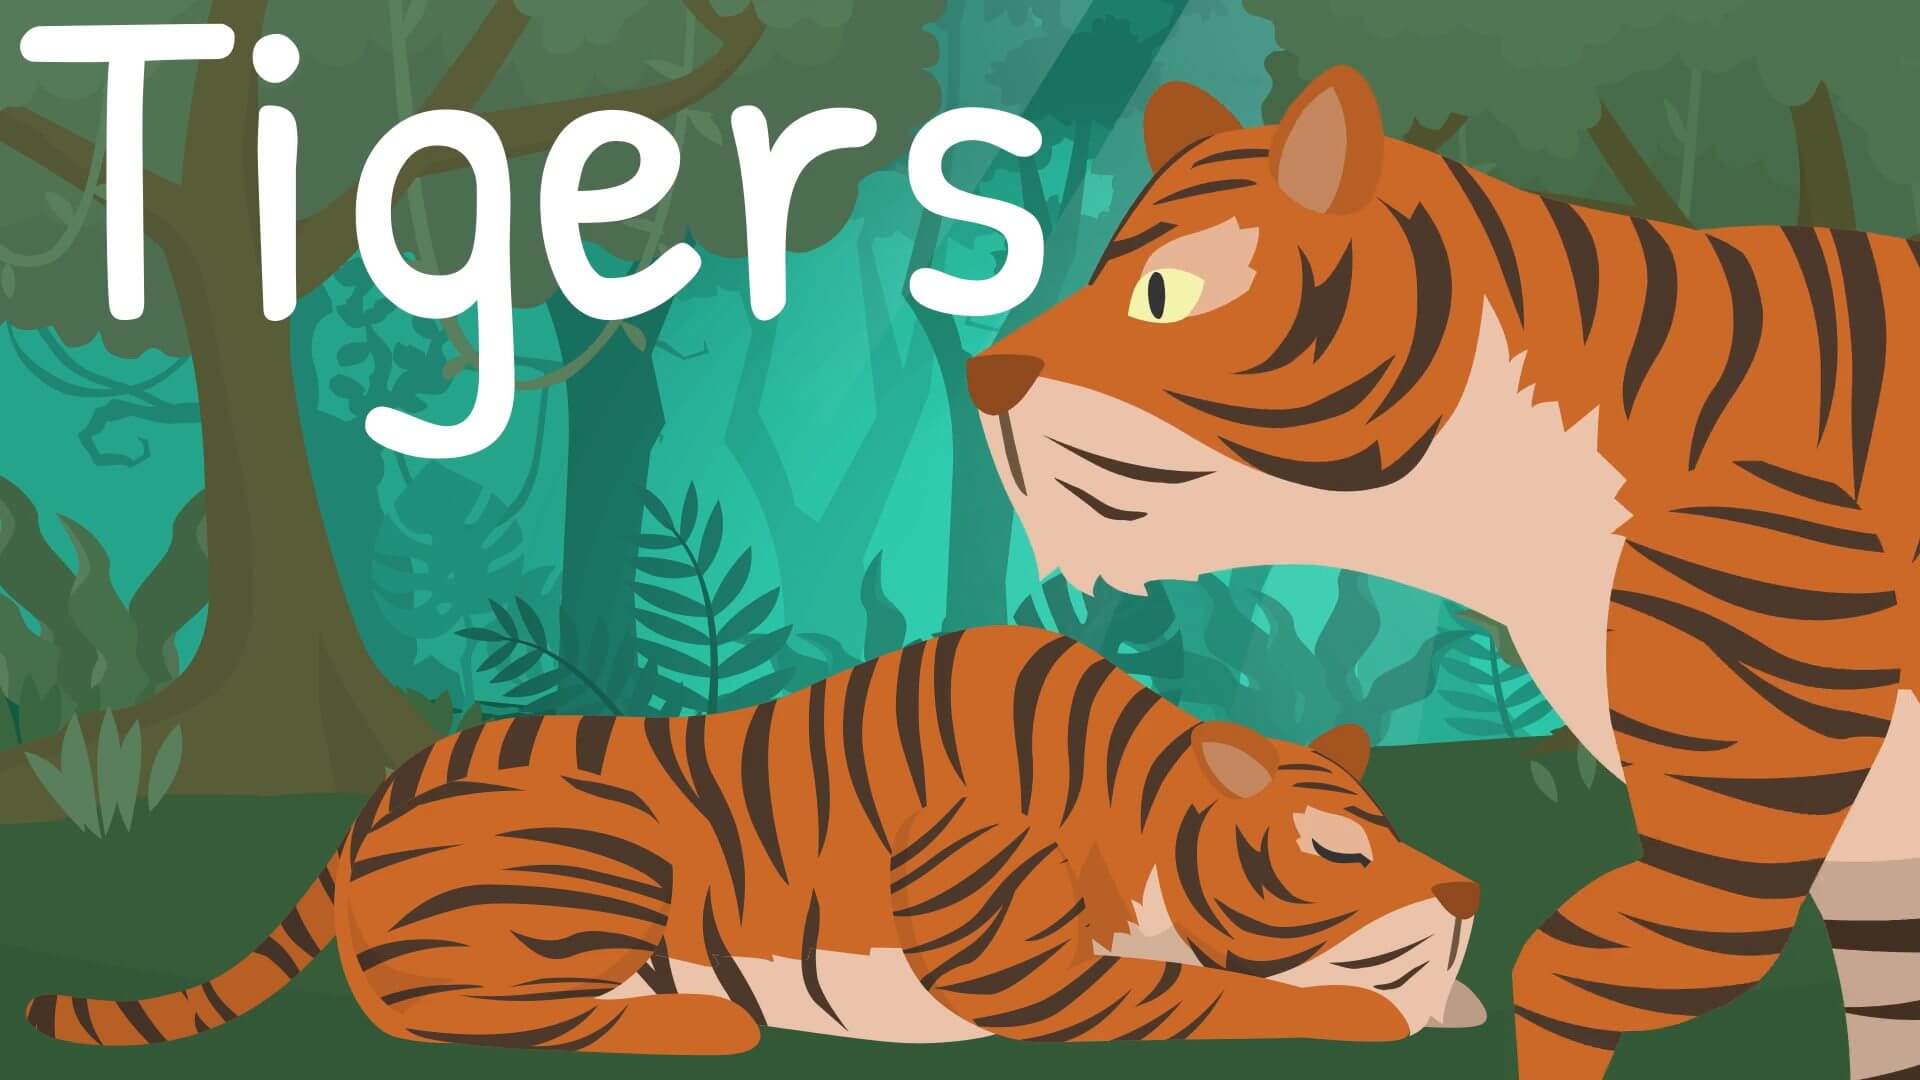 Tiger Facts for Kids  Classroom Learning Video 